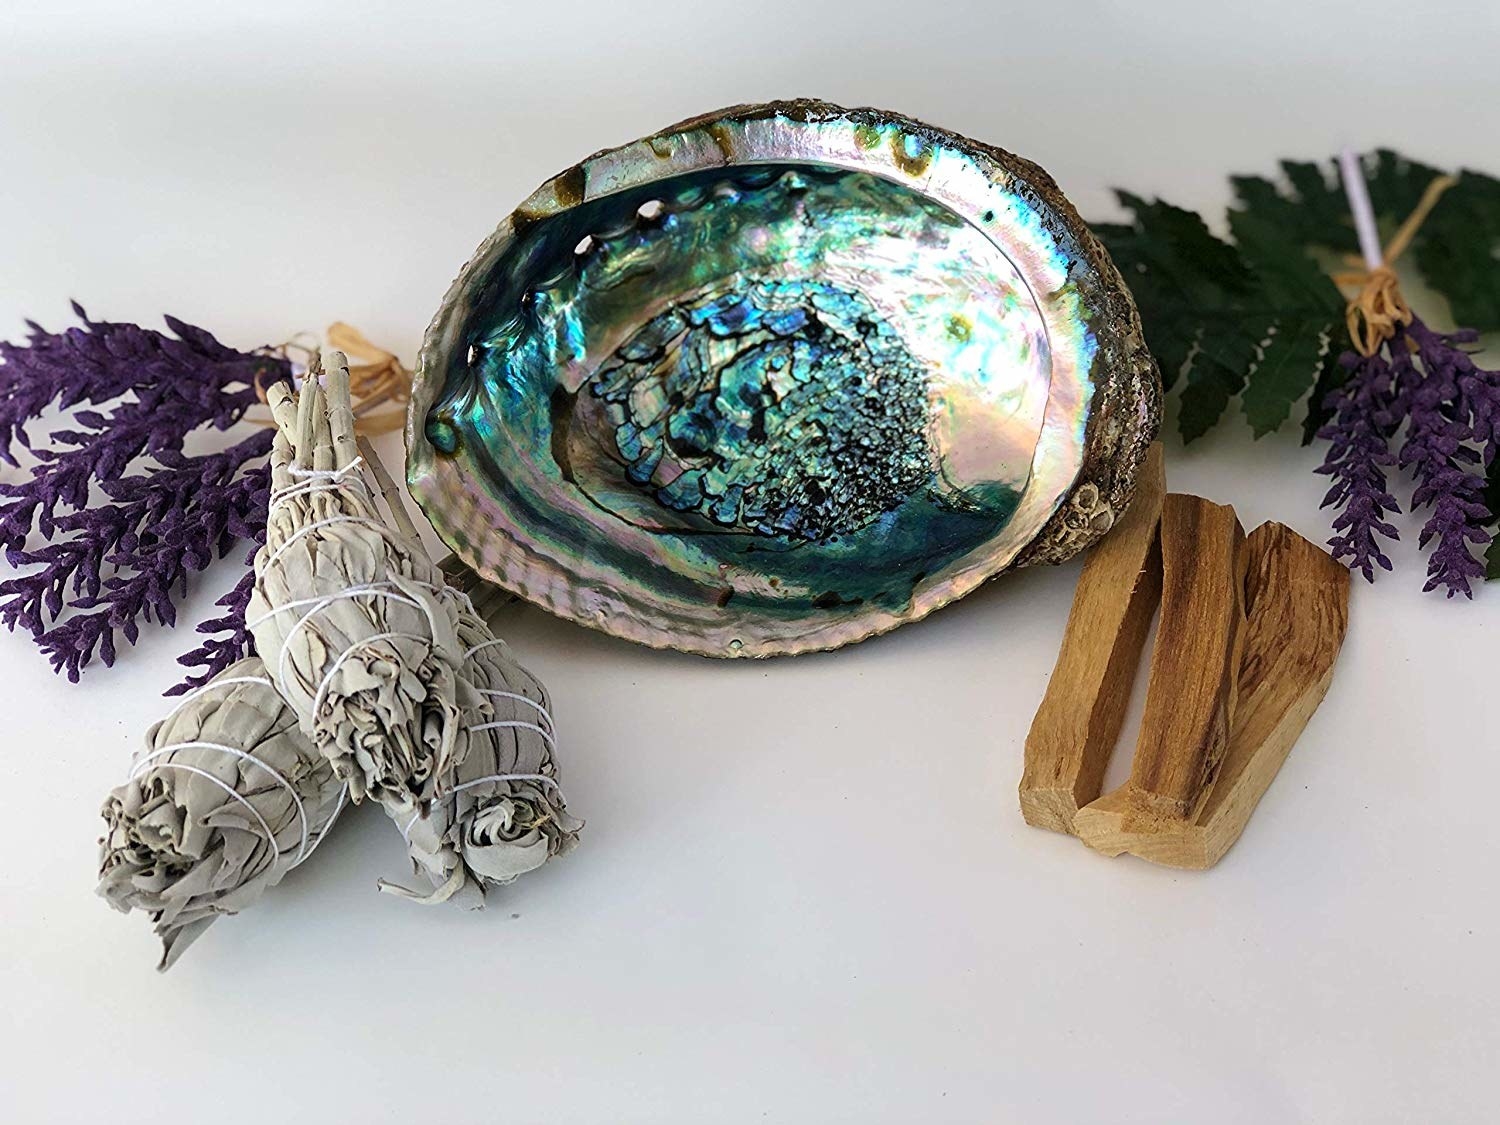 Glistening, colorful shell beside sage and wood 